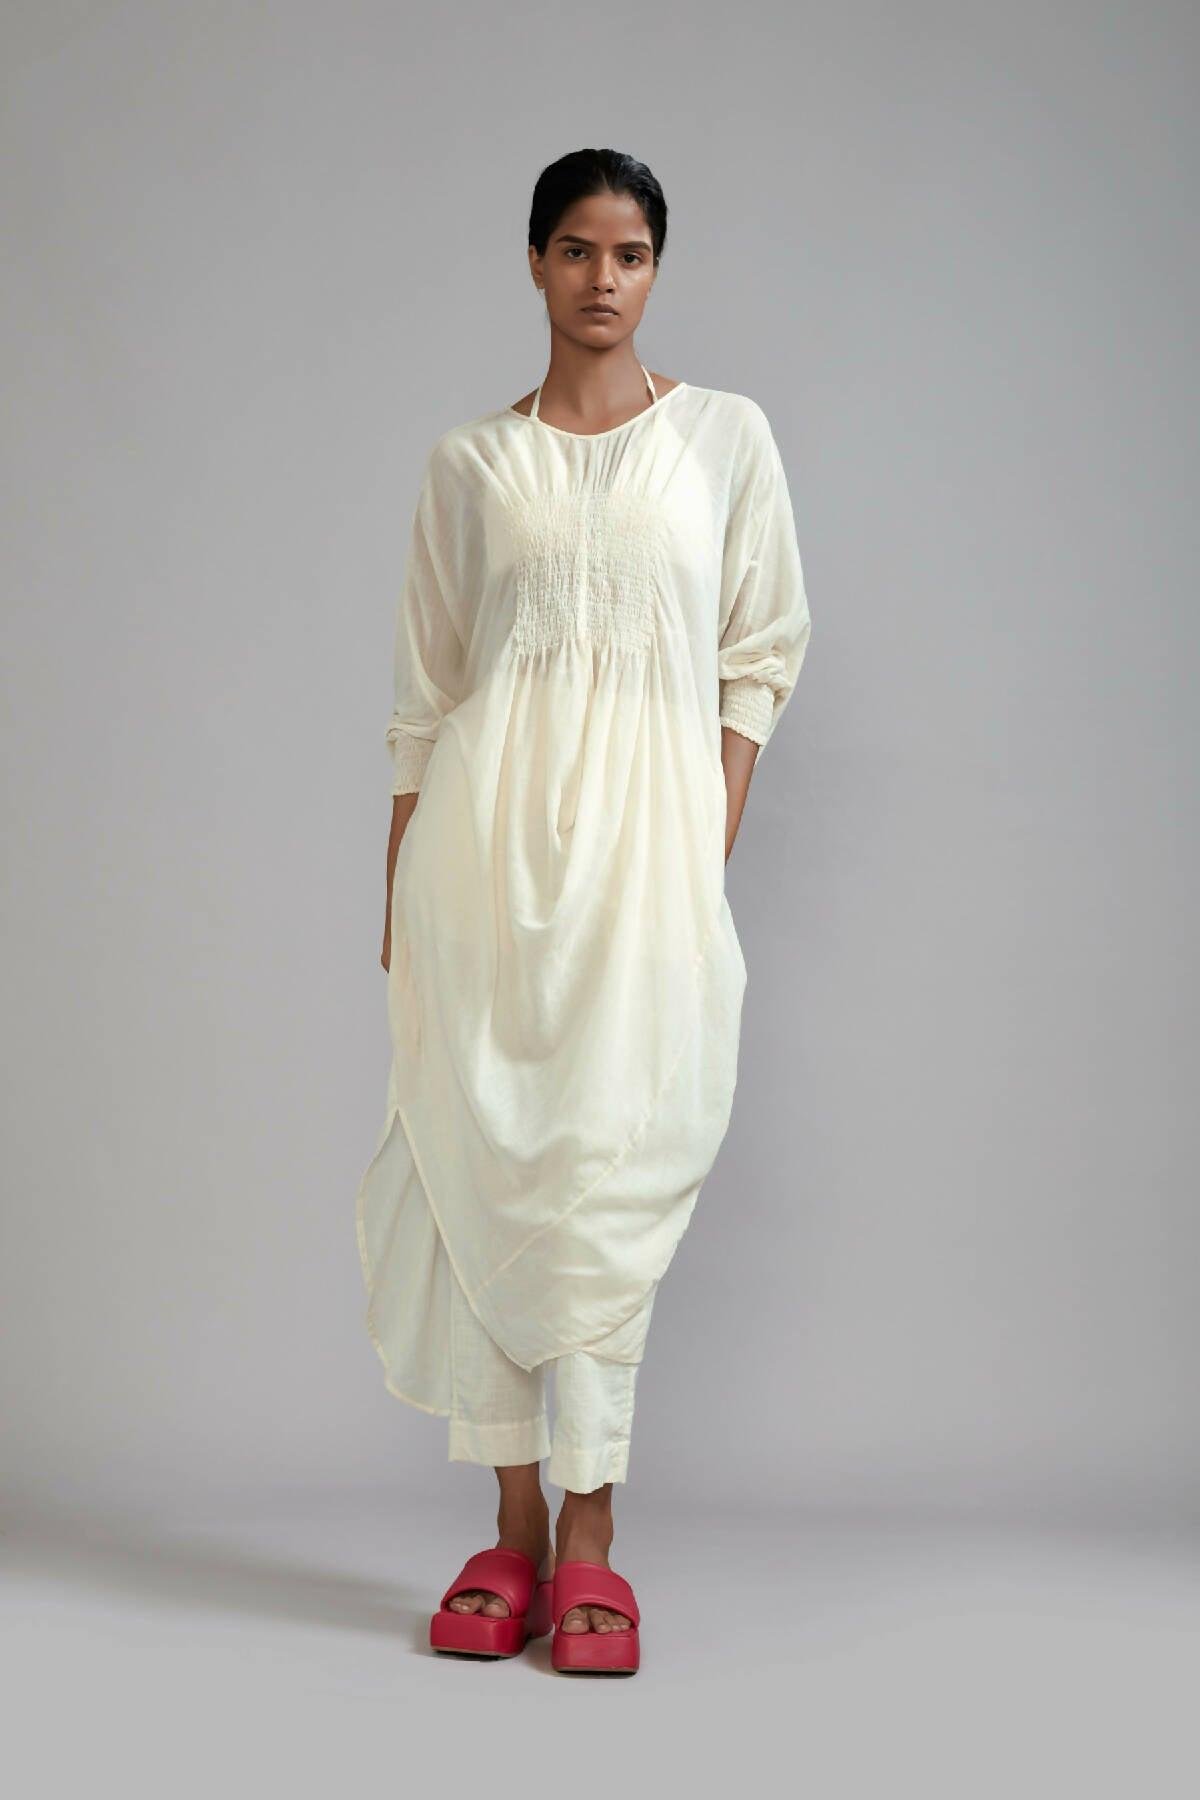 Off-White Smocked Cowl Tunic by MATI